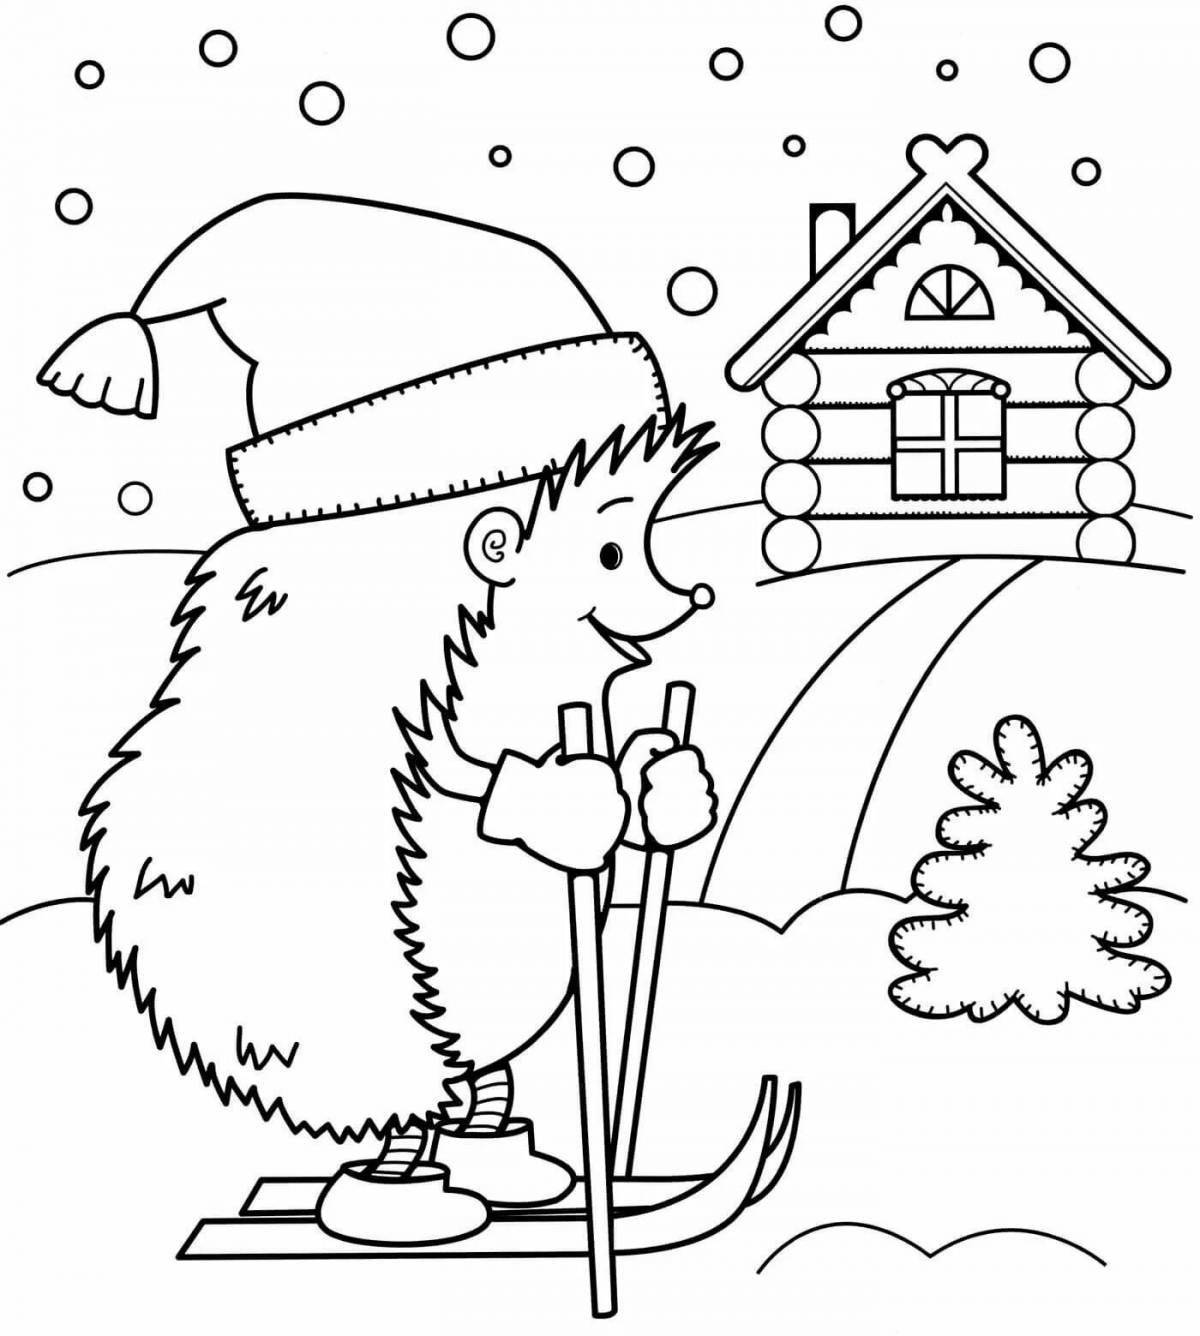 Bright winter coloring book for kids